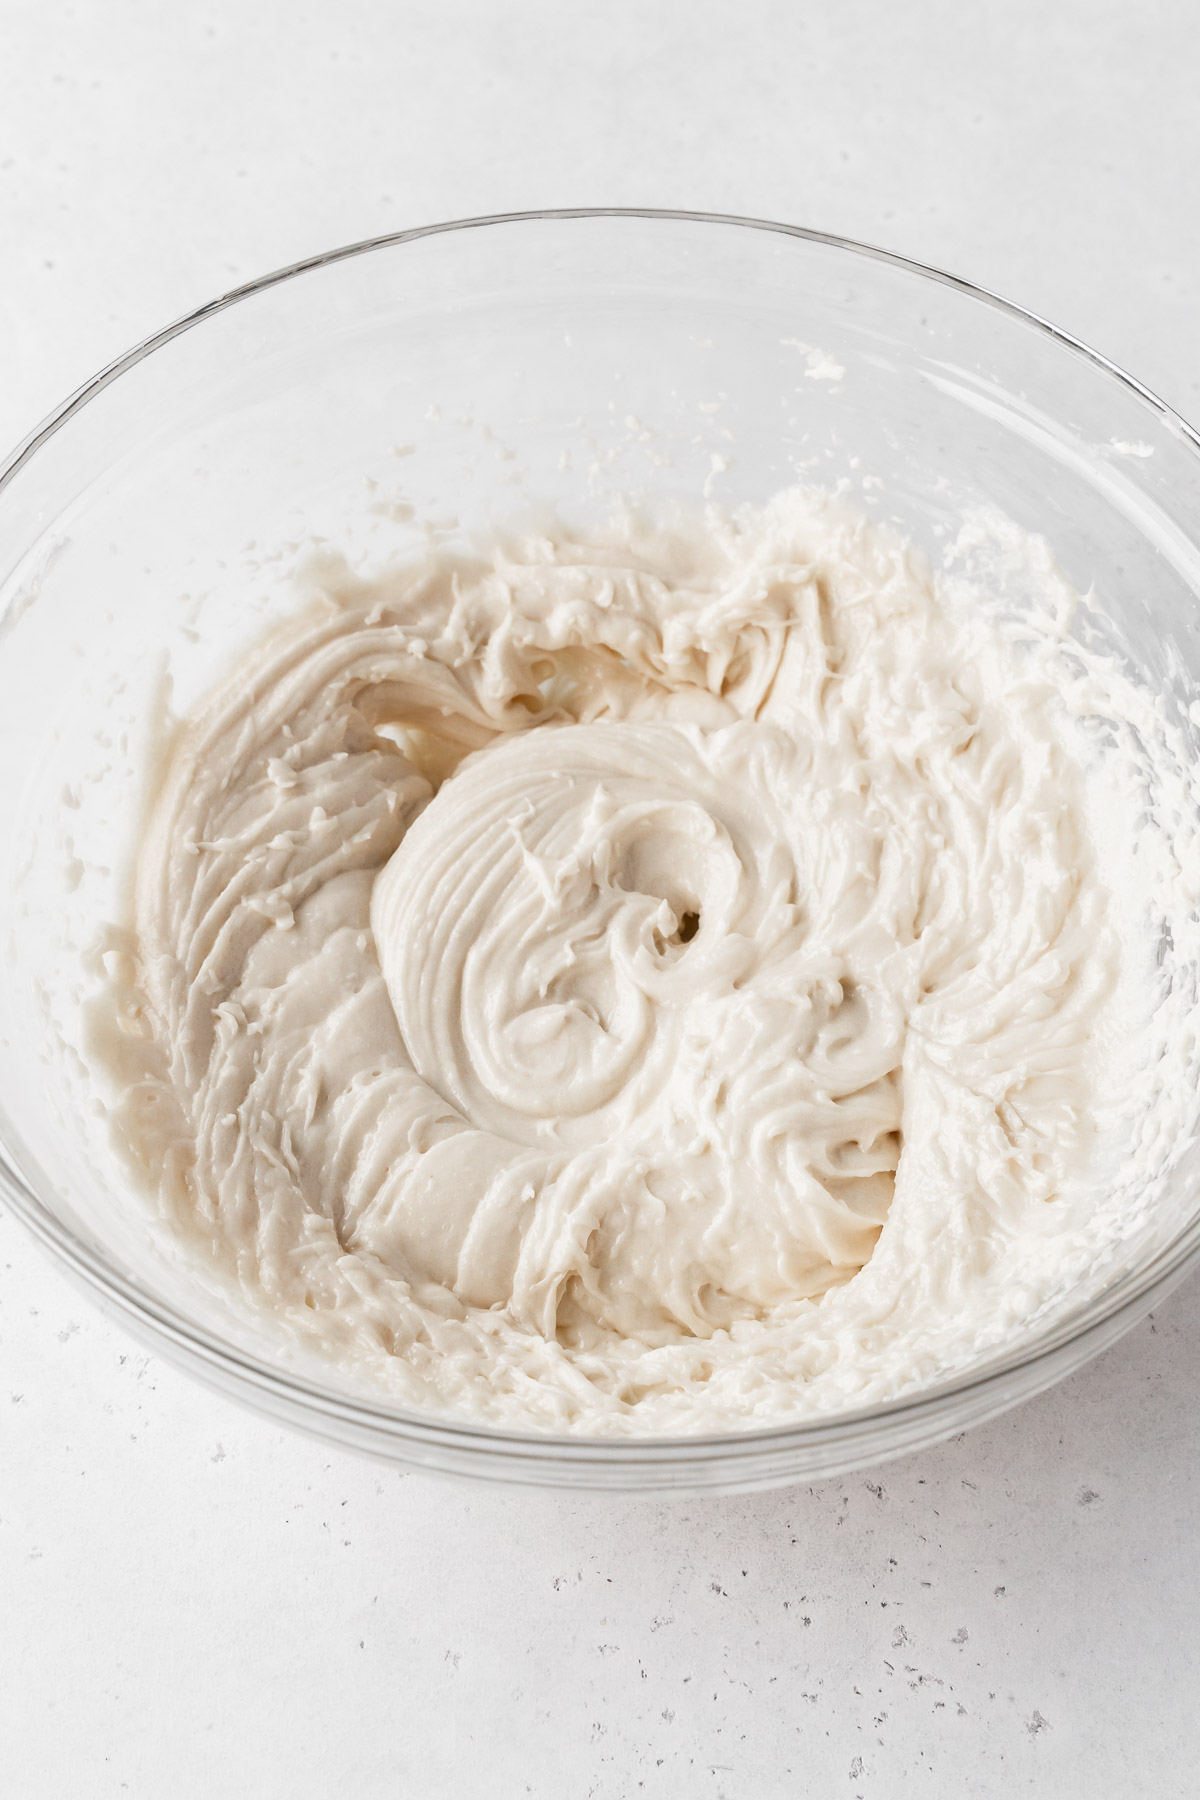 eggless pound cake mixture is light and creamy after the addition of yogurt and extracts.